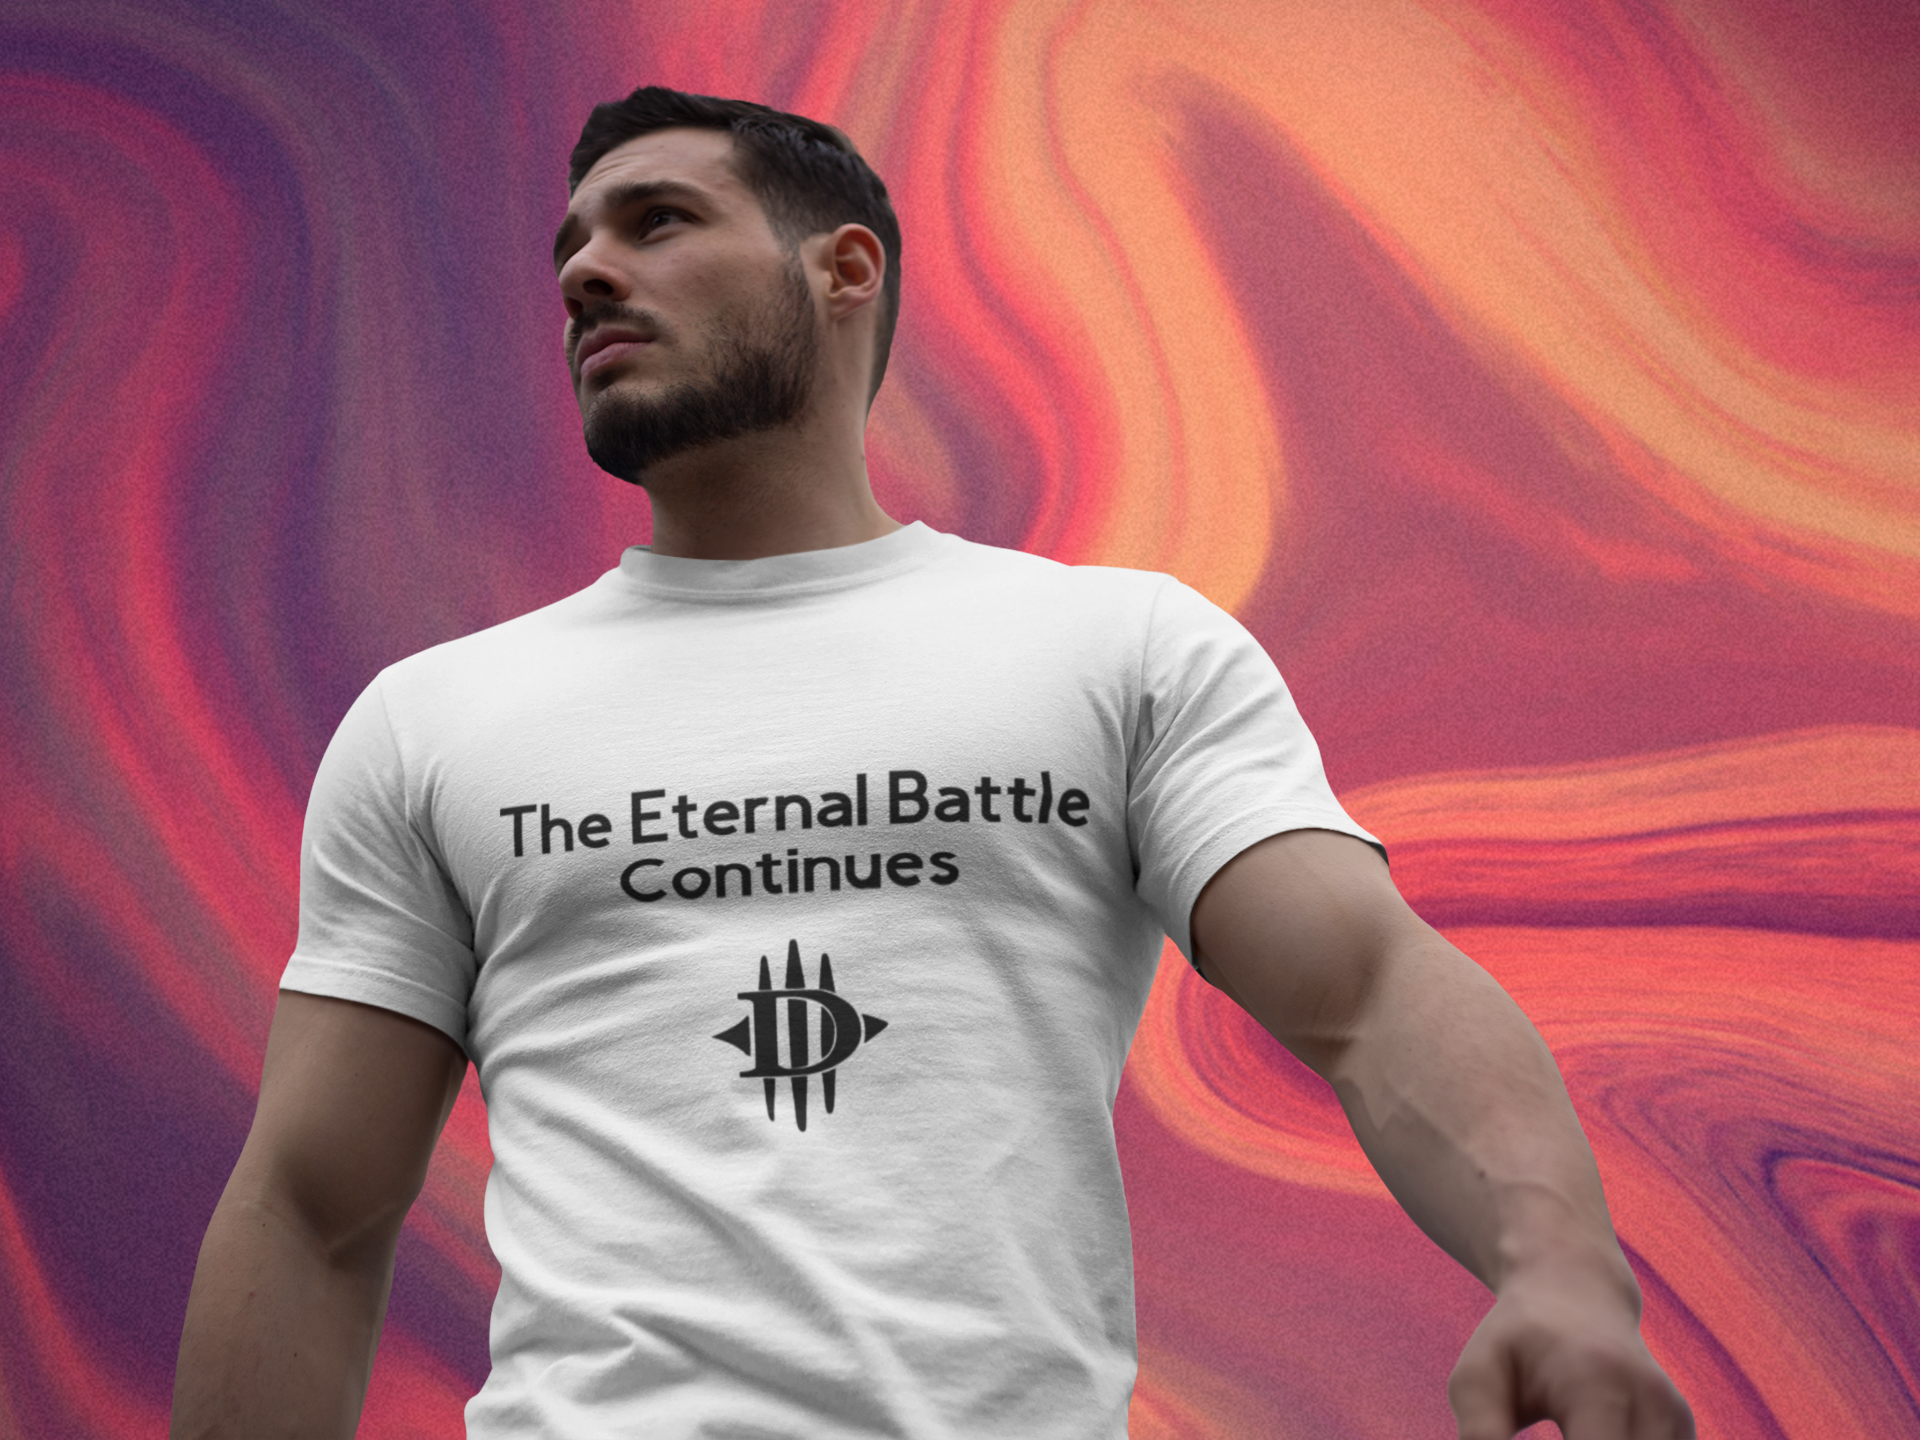 handsome muscular guy wearing a white tshirt that says The Eternal Battle Continues